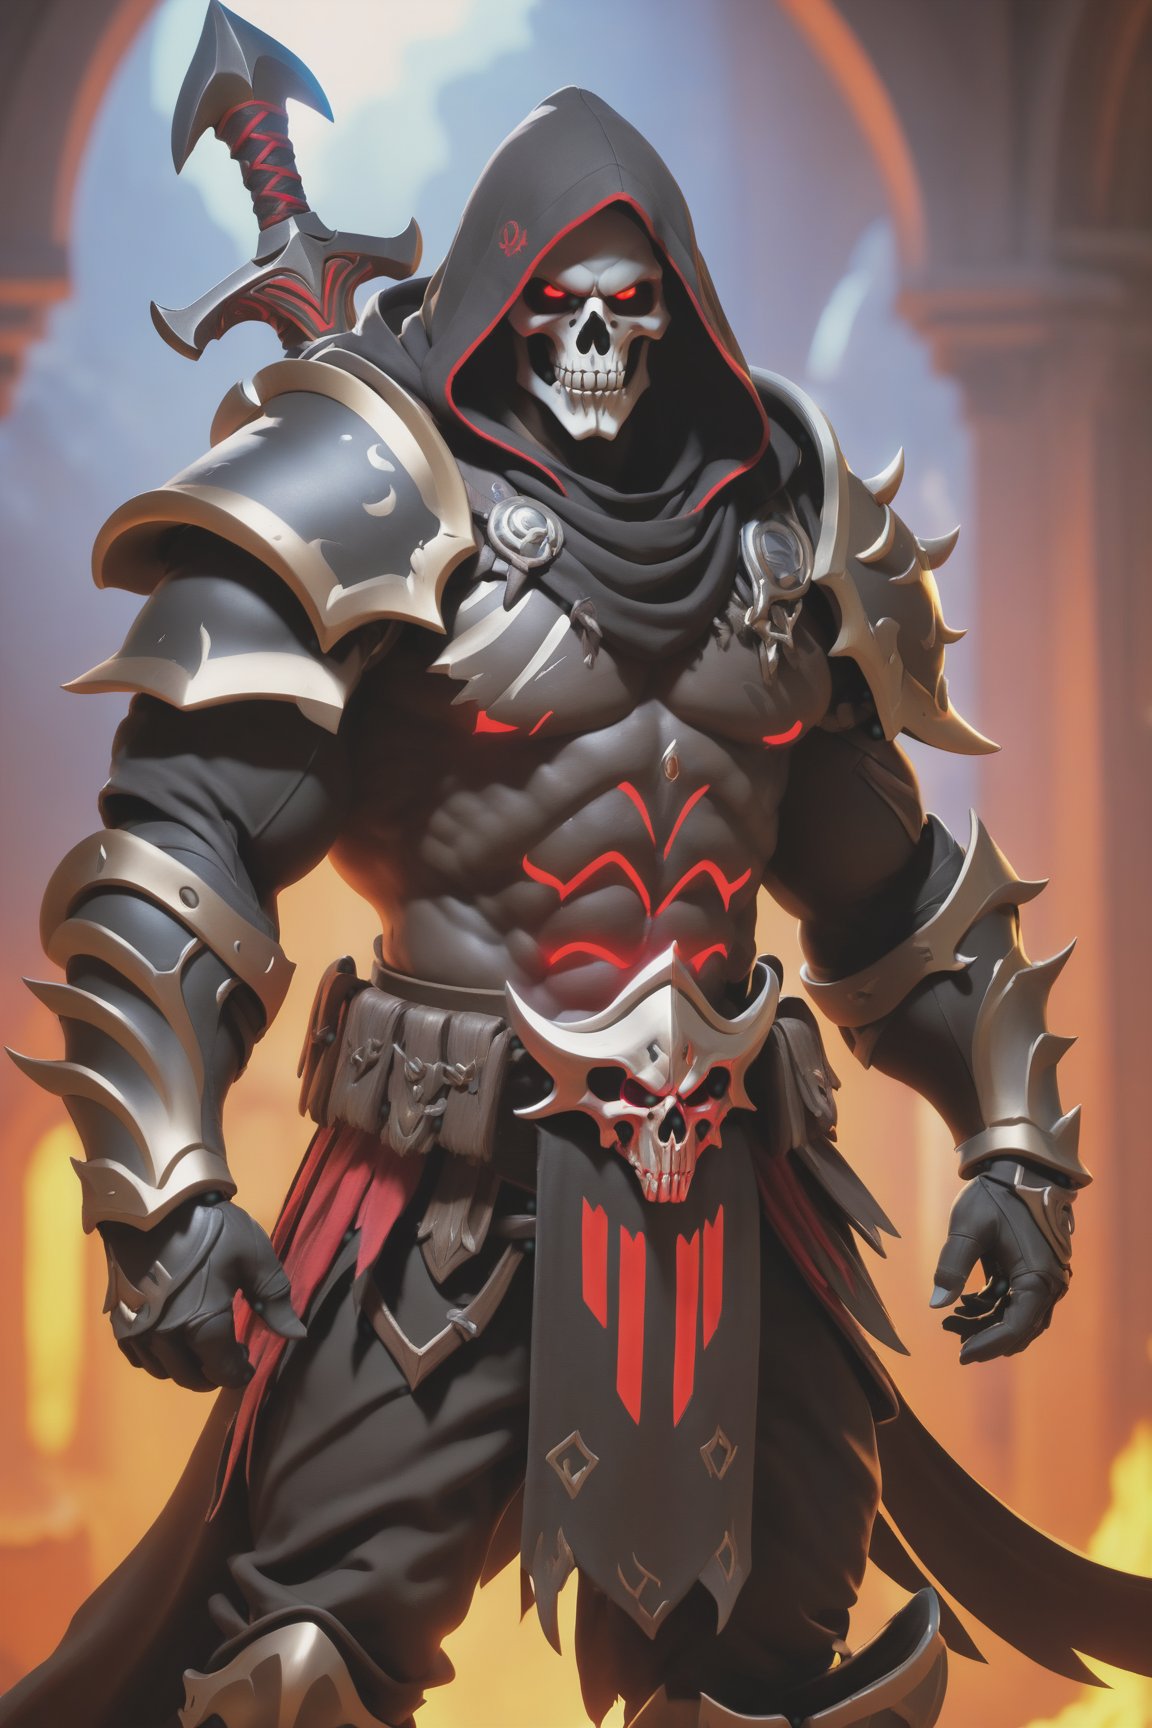 (best quality), (4K, HDR), ((Overwatch)), barbarian Reaper, musuclar man, hooded, strong body, glowing red eyes, (Death shot), fantasy style armor and clothing, fantasy, vibrant colors, dark fantasy, dark